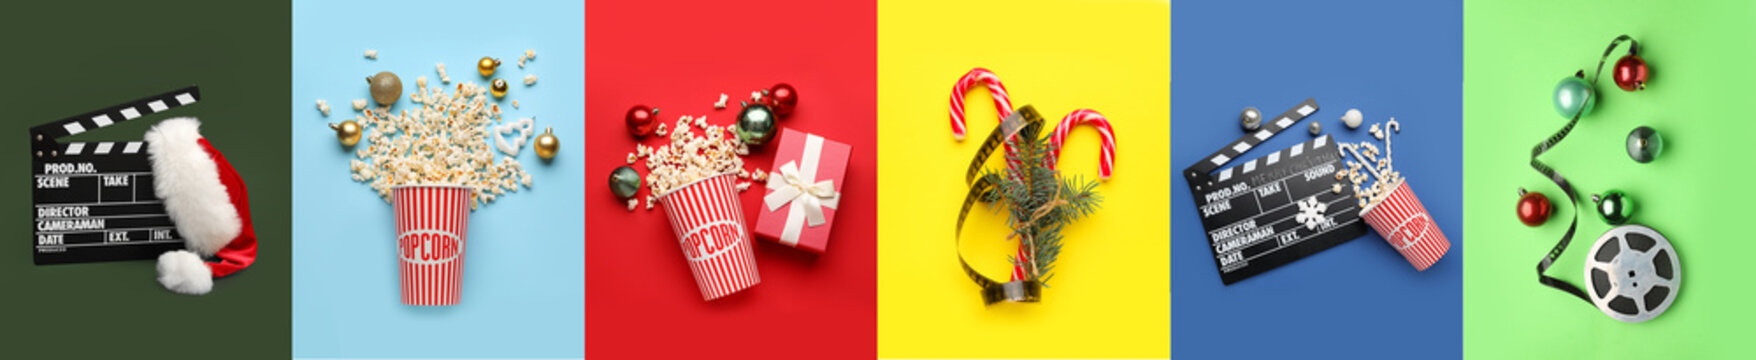 Collage of Christmas decorations with popcorn, movie clappers and film reel on color background